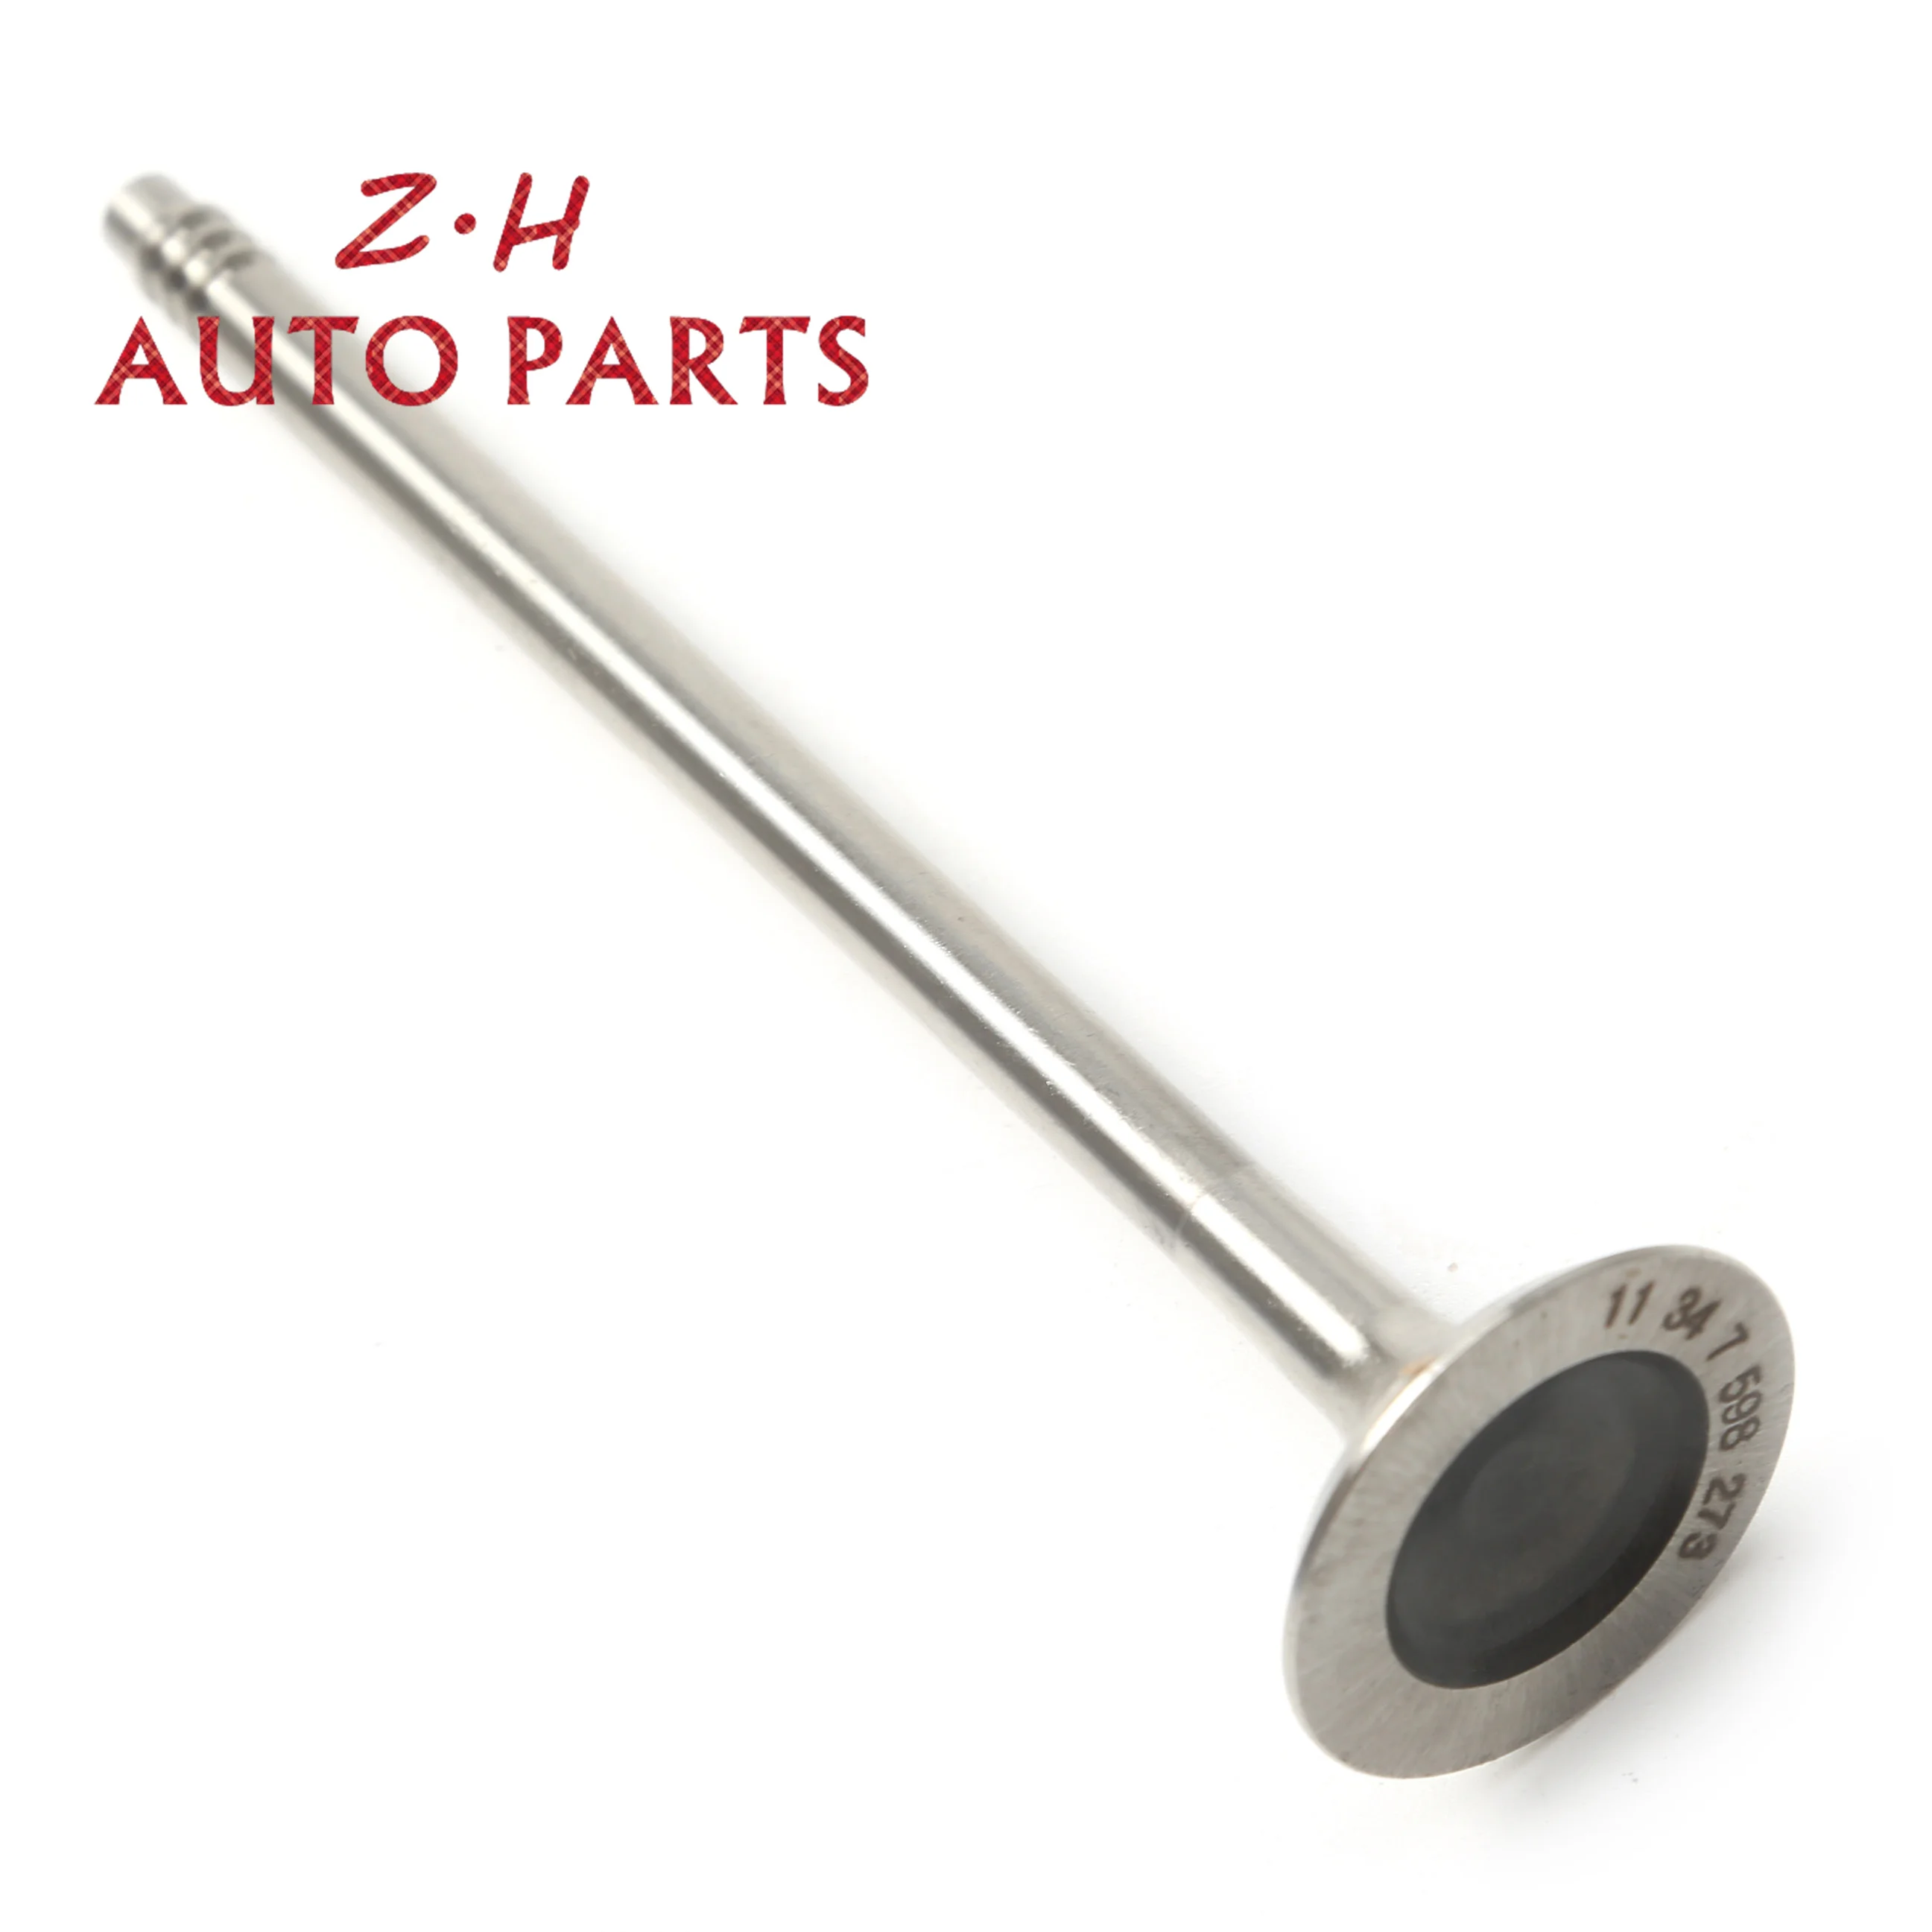 Engine Exhaust Valve Kit For BMW F20 2012-2017 F23 F34 F36 F10 X1 X3 F25 X4 2014-2018 X5 Z4 Roadster E89 11347583780 11347598273 images - 6